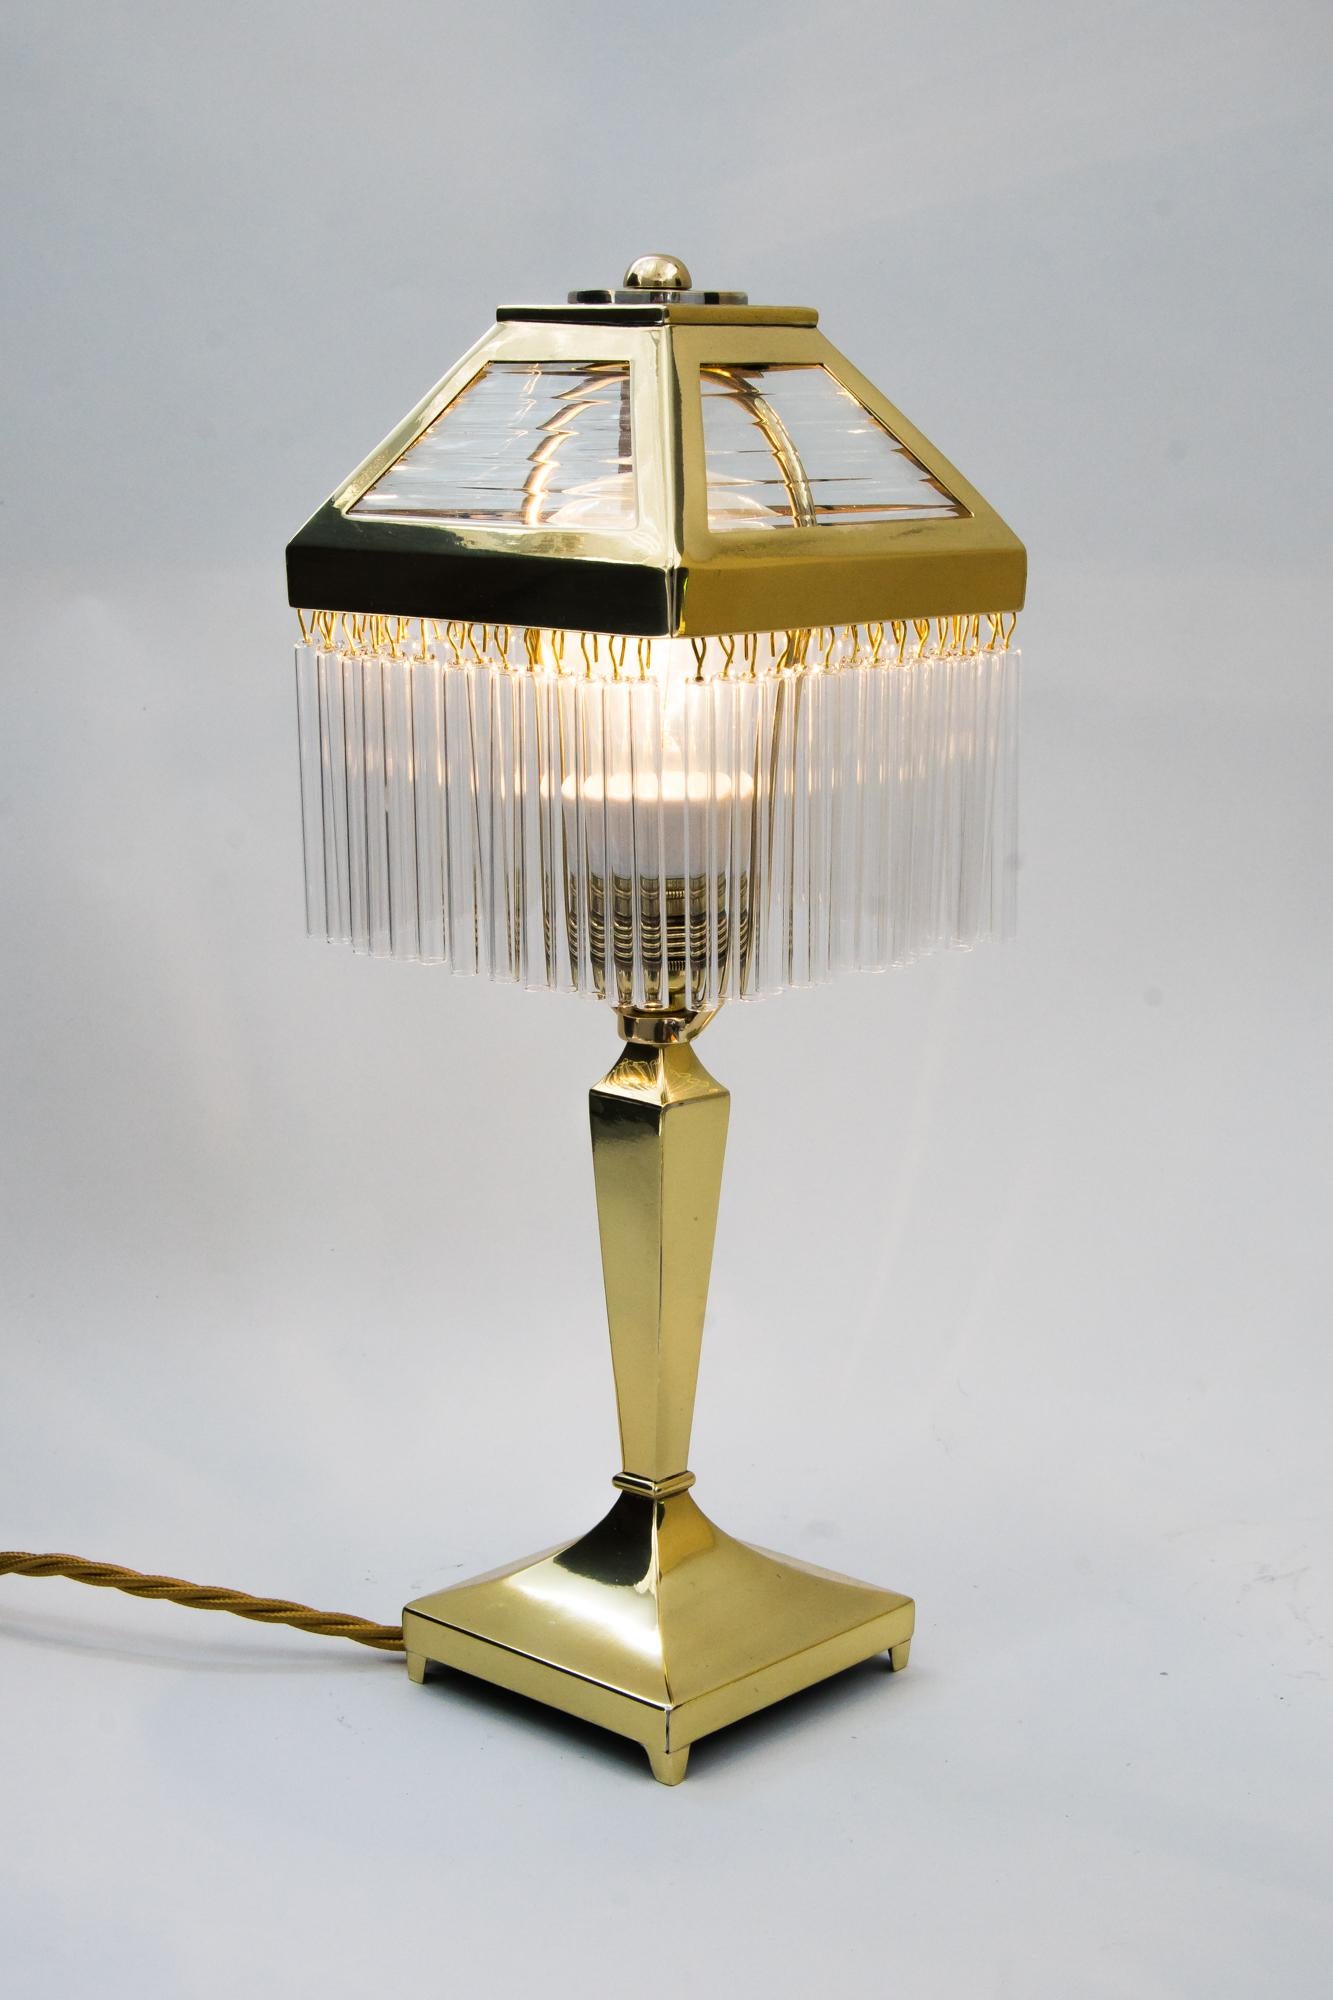 Small Art Deco table lamp, circa 1920s
Polished and stove enameled
Original glasses
Glass sticks are replaced (new).